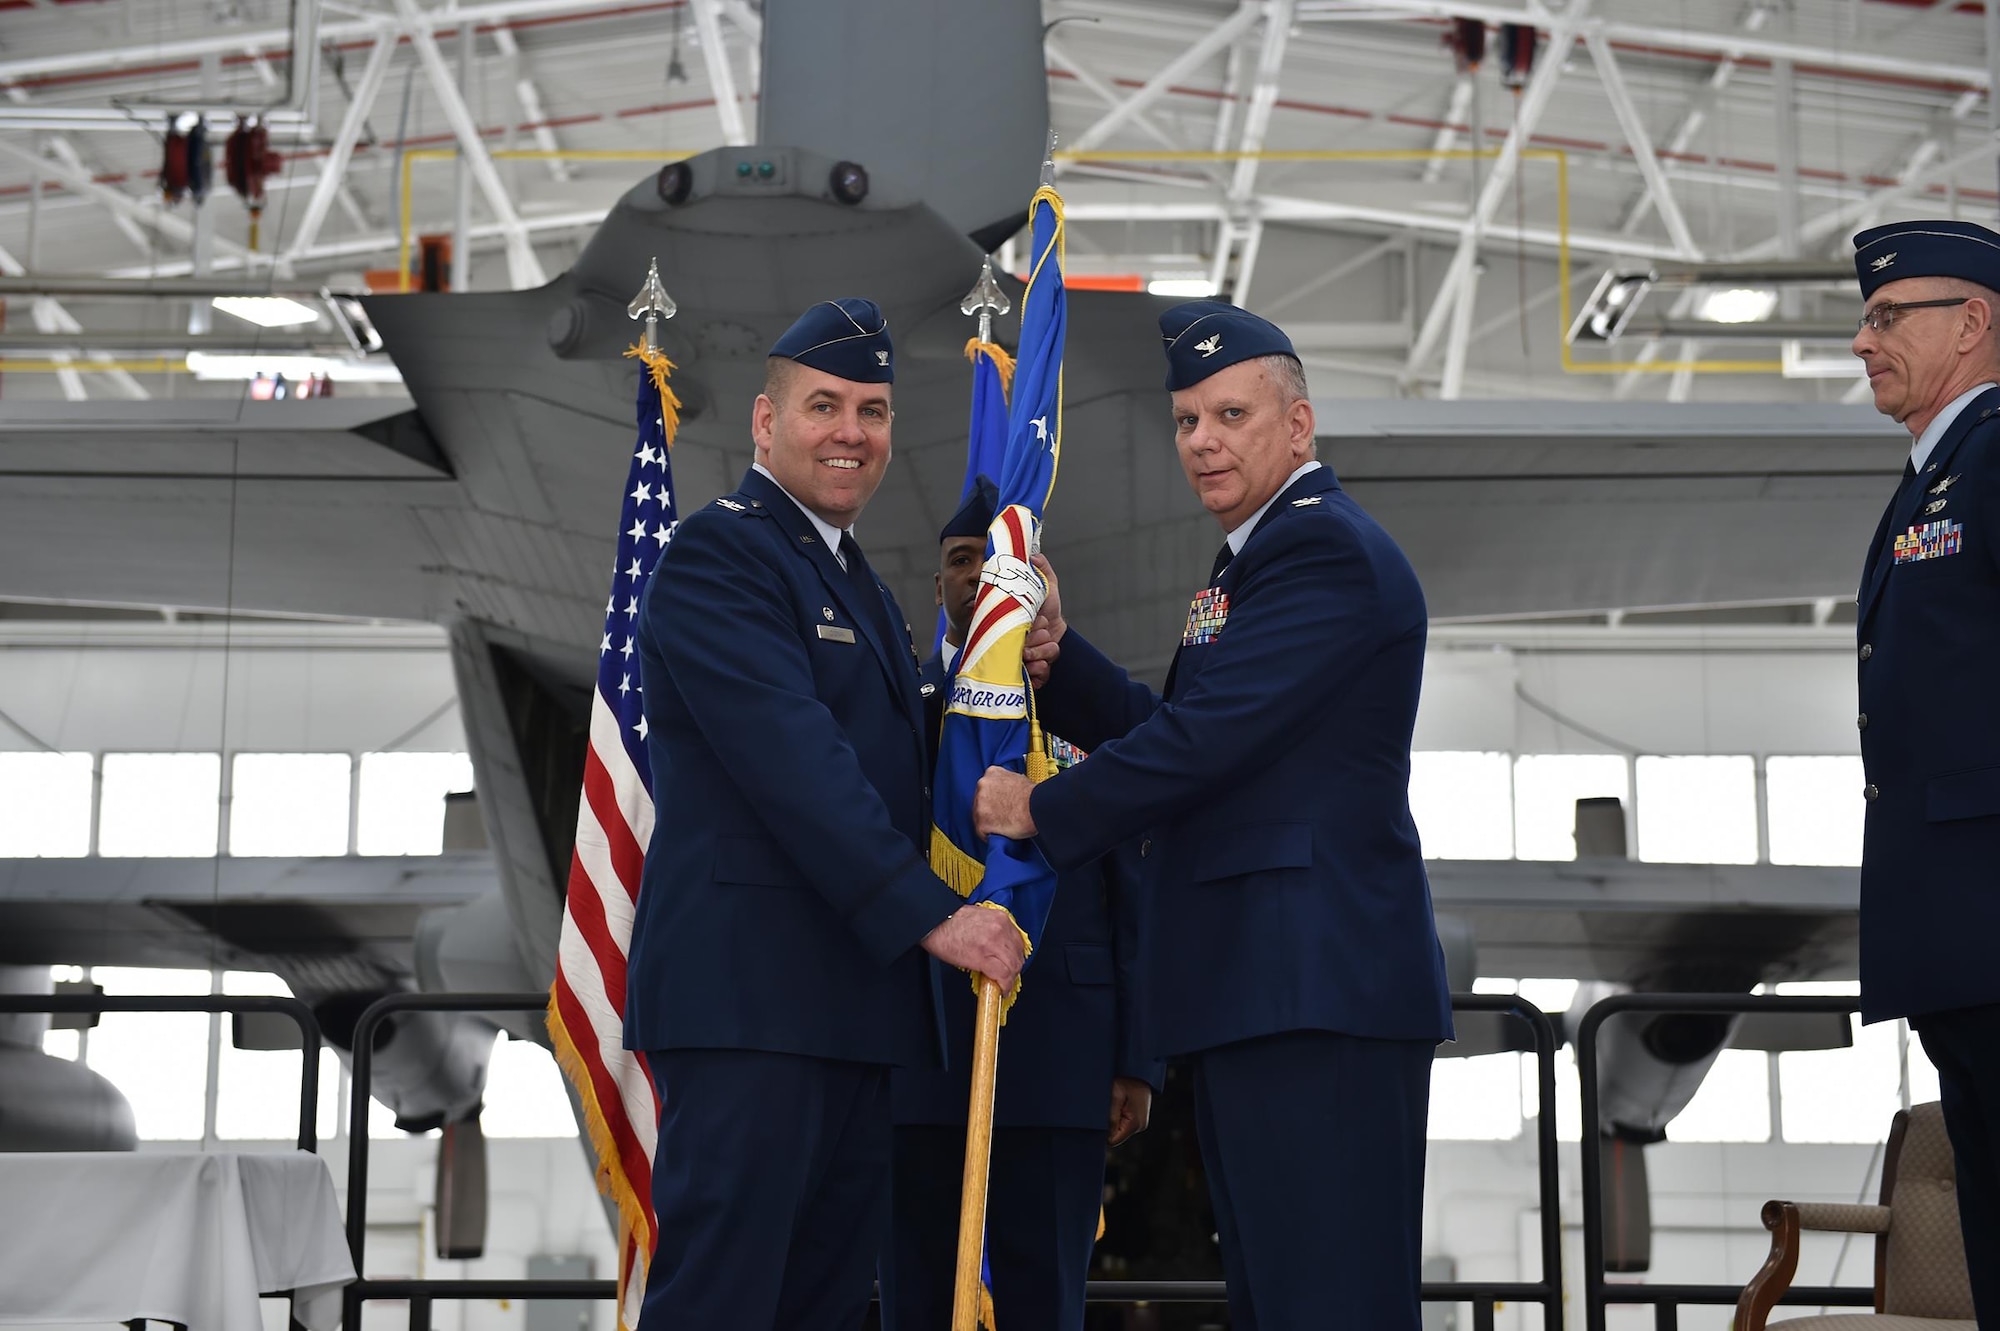 Col. James Dignan, 910th Airlift Wing commander, passes the 910th Mission Support Group flag to incoming commander, Col. Donald Wren, here, April 3, 2016. Wren replaced Col. Kevin Riley who retired after 31 years of service. (U.S. Air Force photo/Tech. Sgt. Rick Lisum)